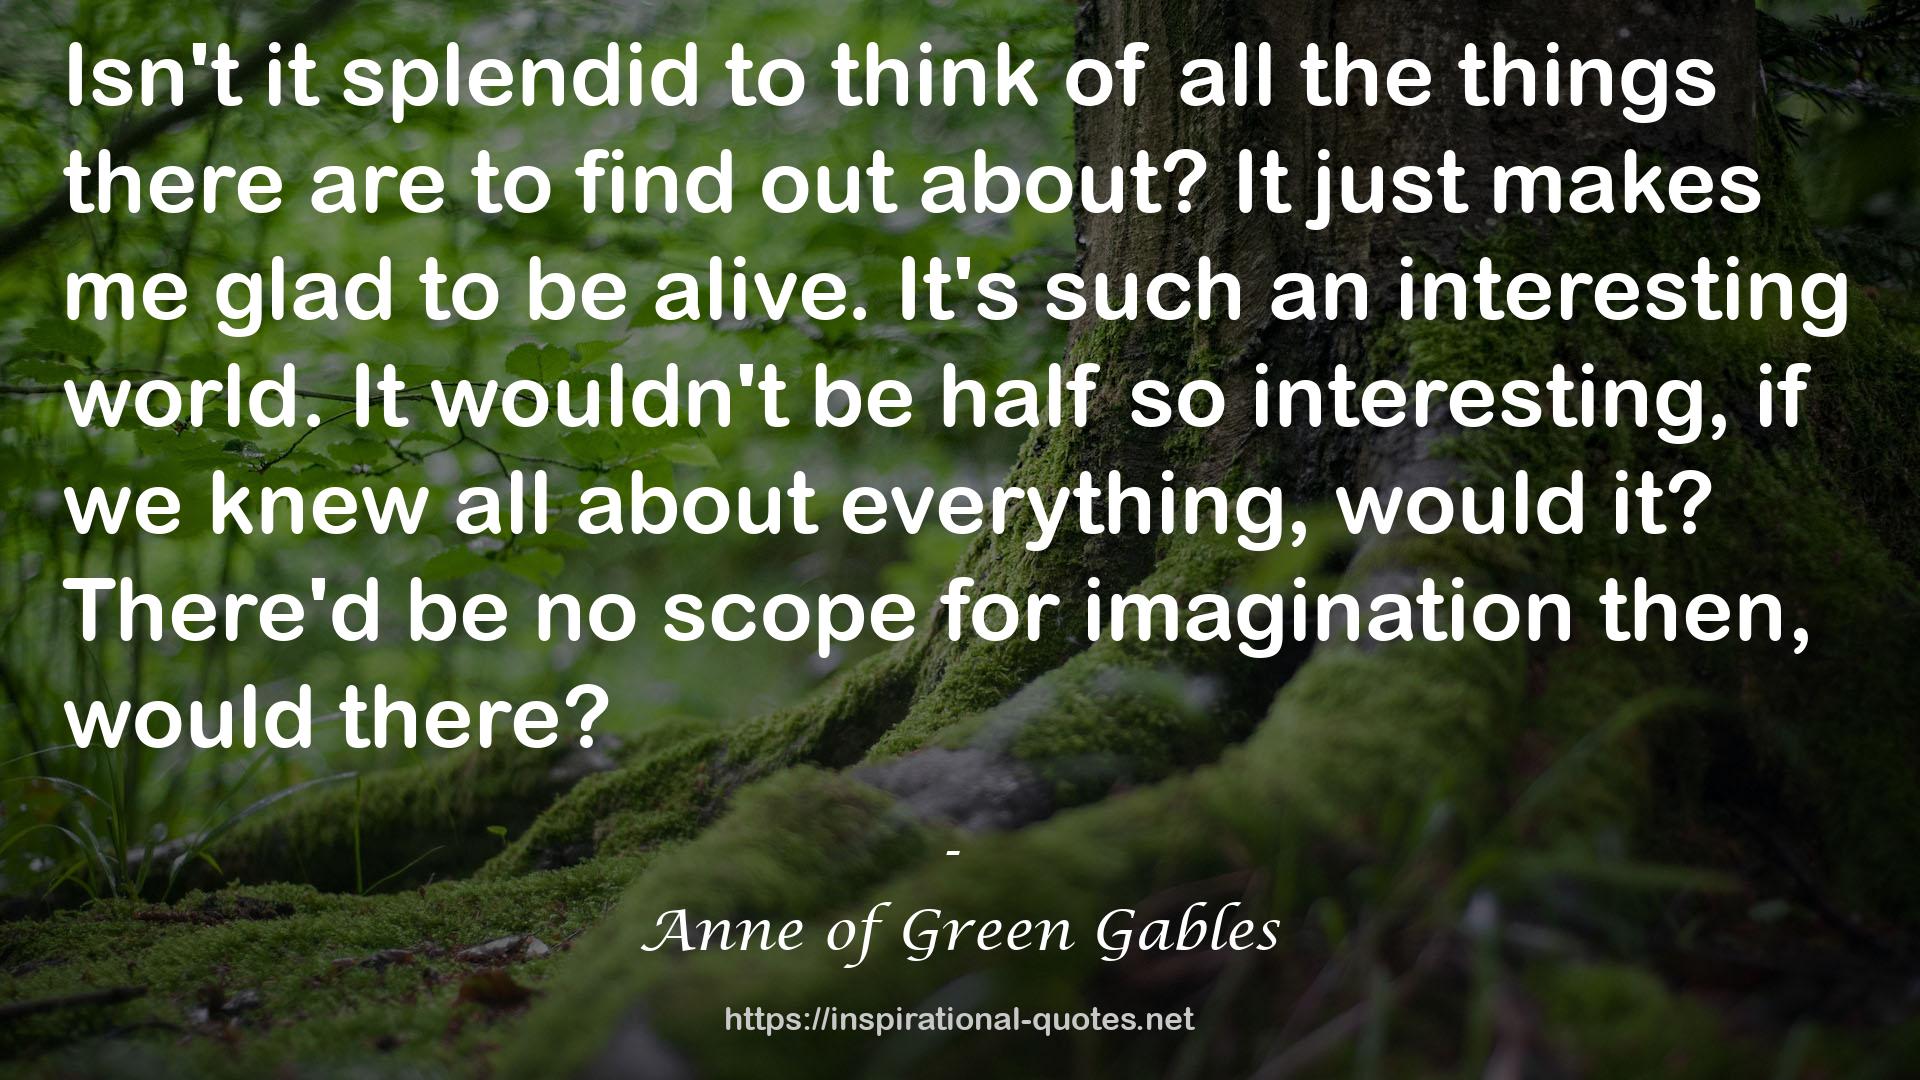 Anne of Green Gables QUOTES